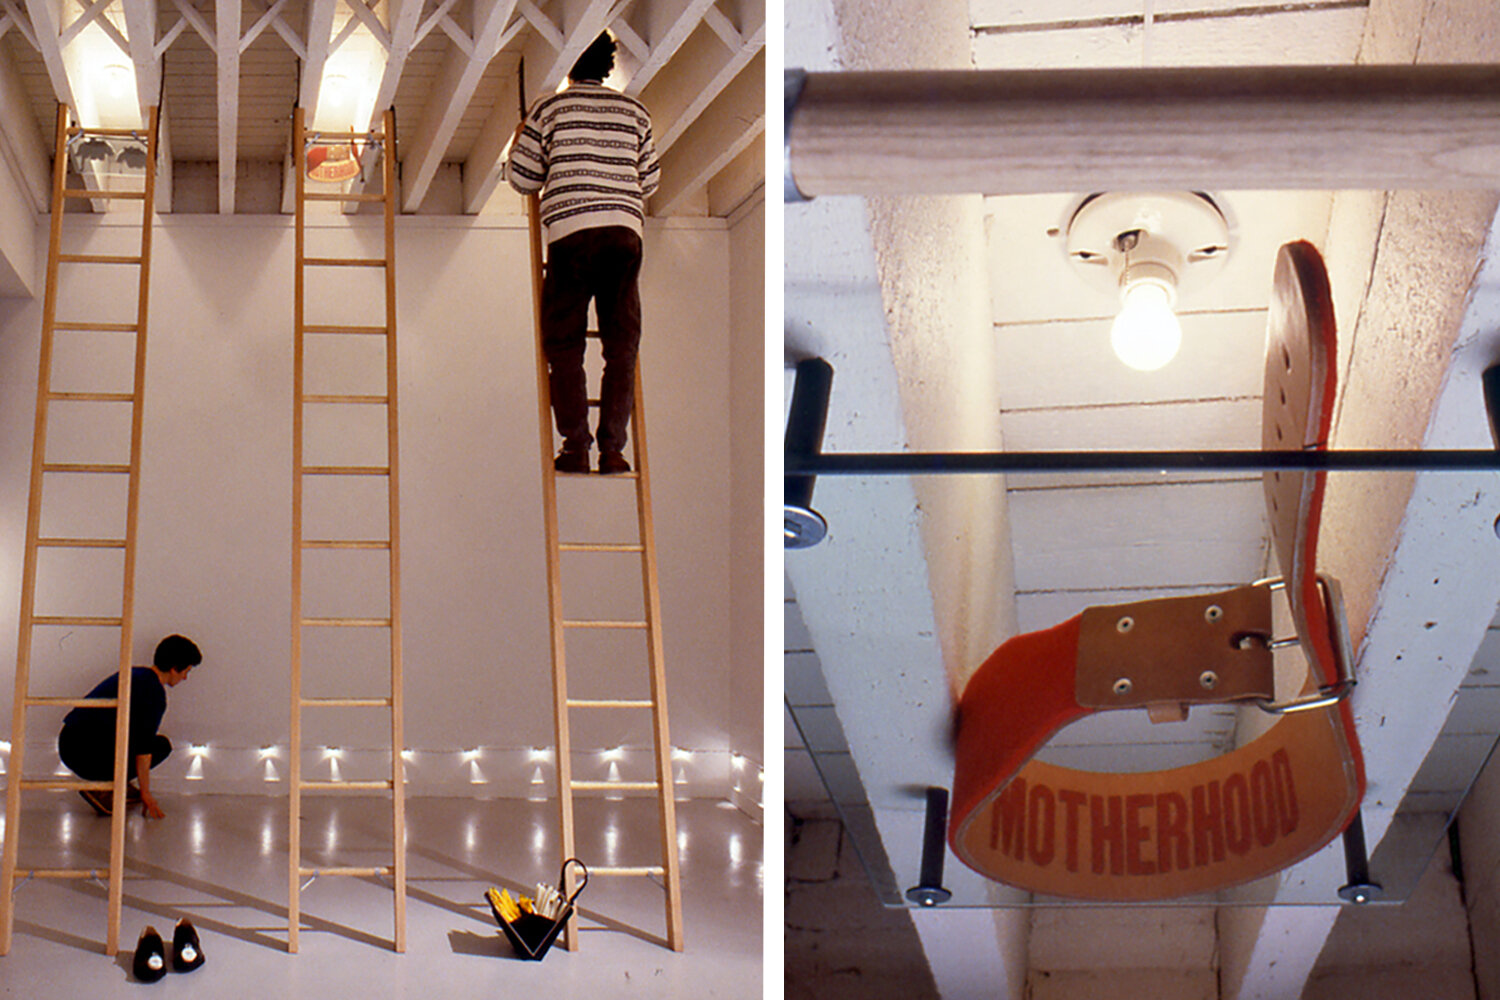   Measuring With Eyes and Feet : detail and installation view 1991. Photo: B.T. Martin 